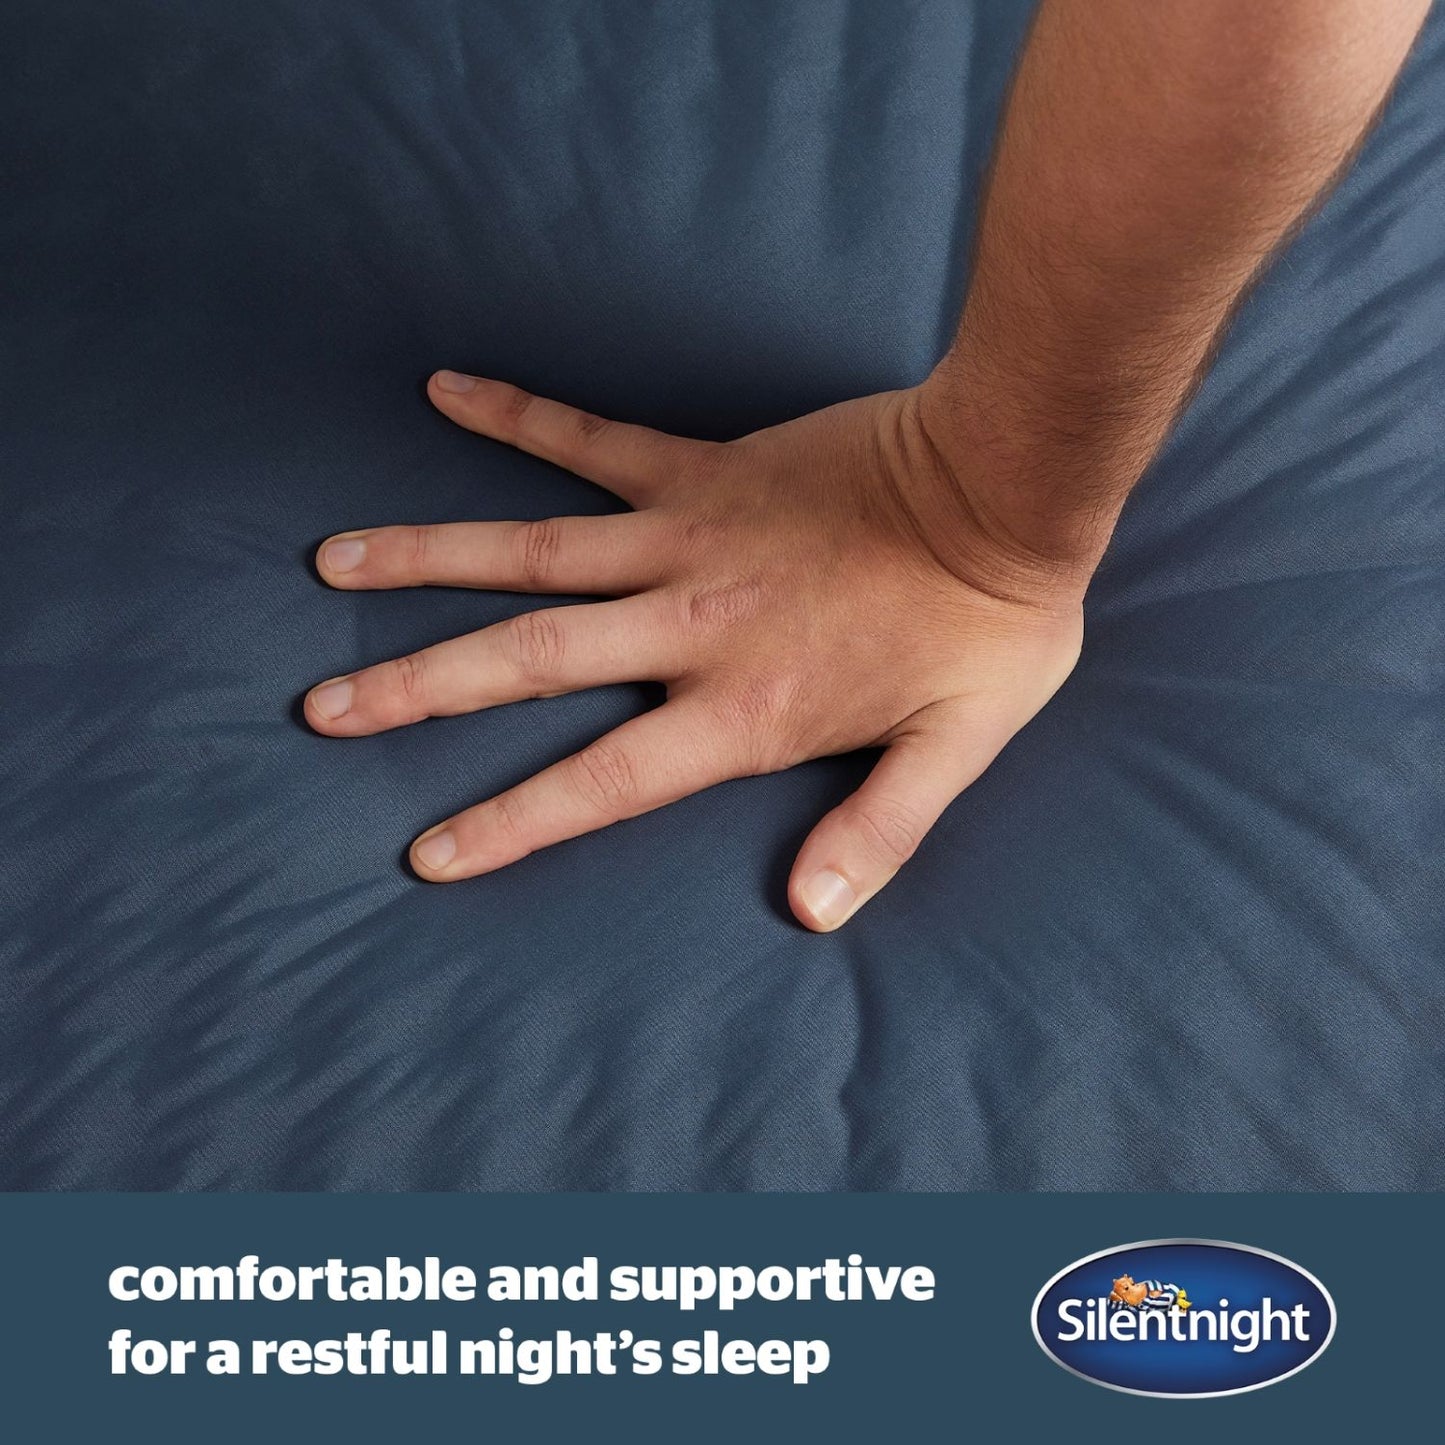 Silentnight Camping Collection Self Inflating Mattress